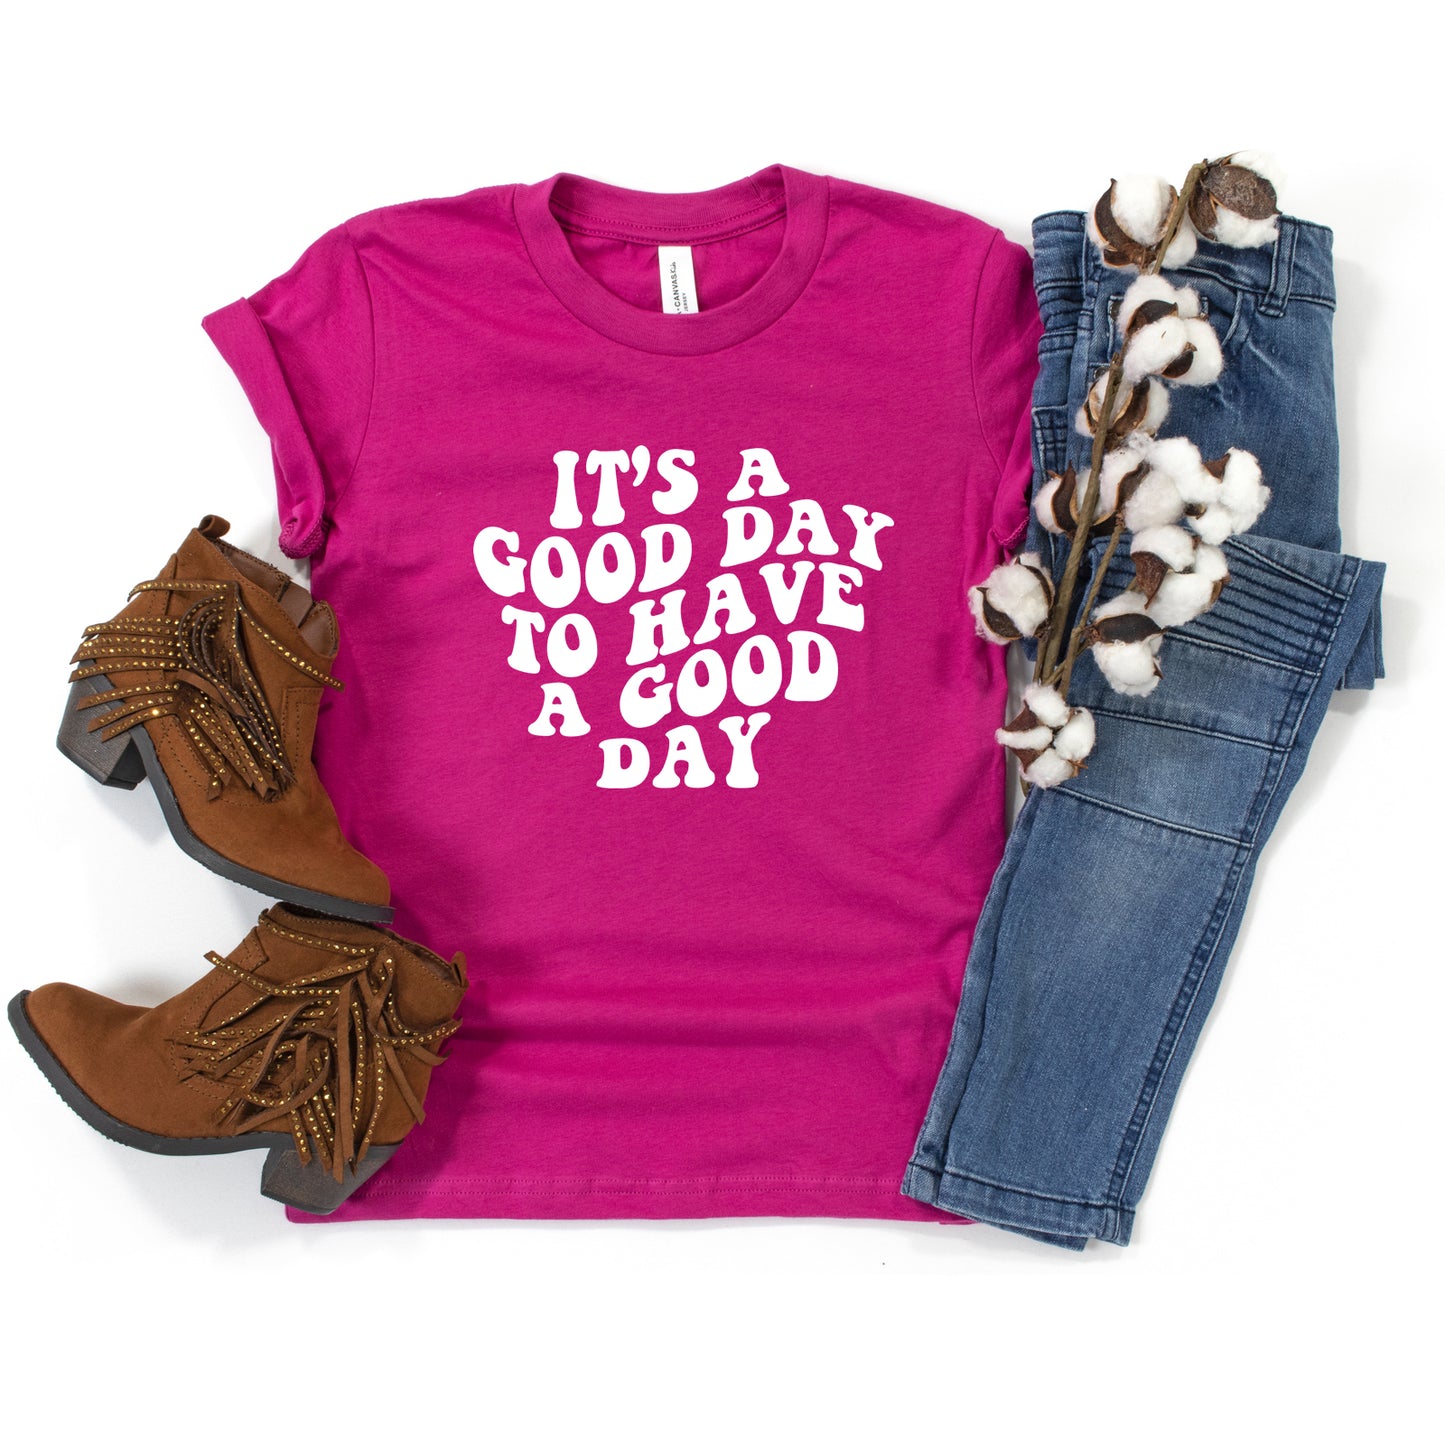 It's A Good Day To Have A Good Day | Youth Short Sleeve Crew Neck